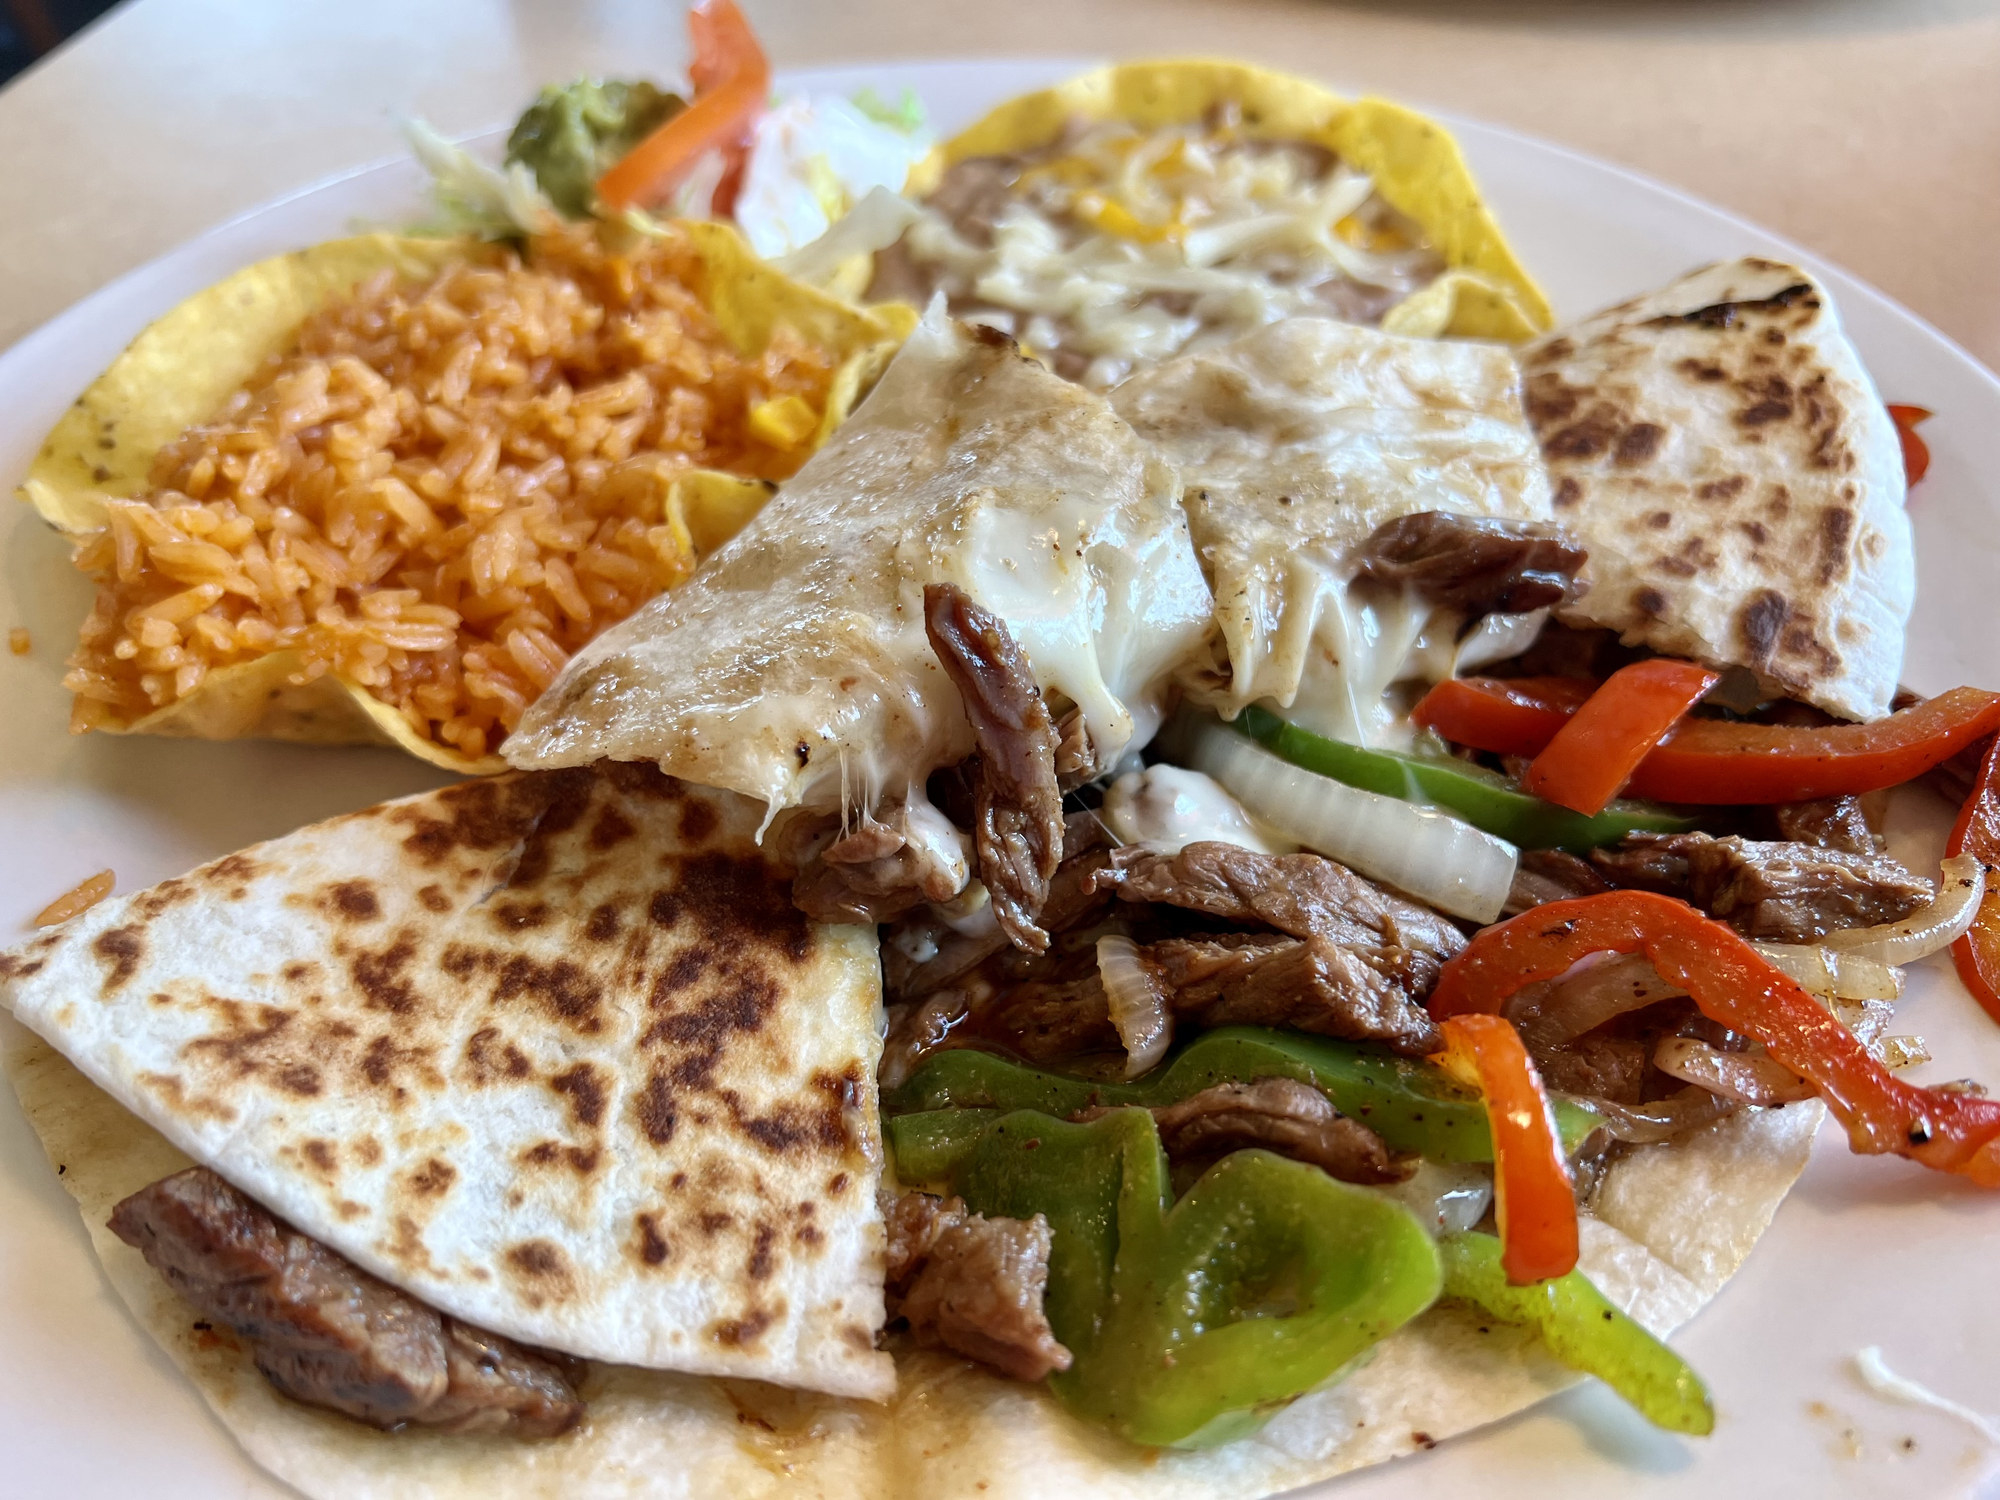 A steak quesadilla with rice and beans